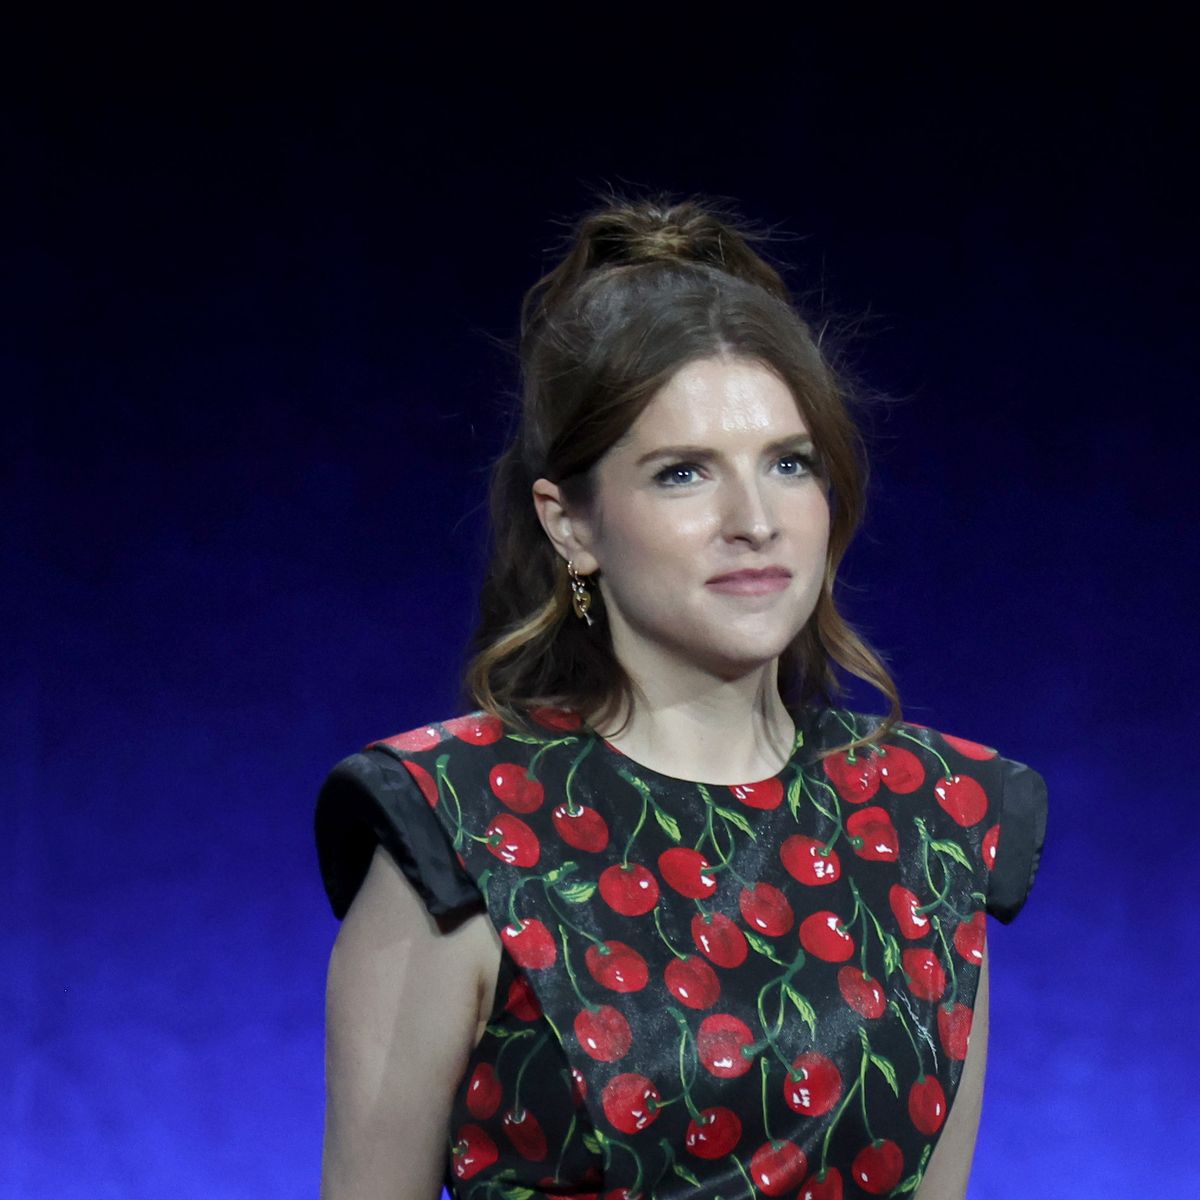 Anna Kendrick New York Fashion Week Watch: All Her Best Outfits So Far